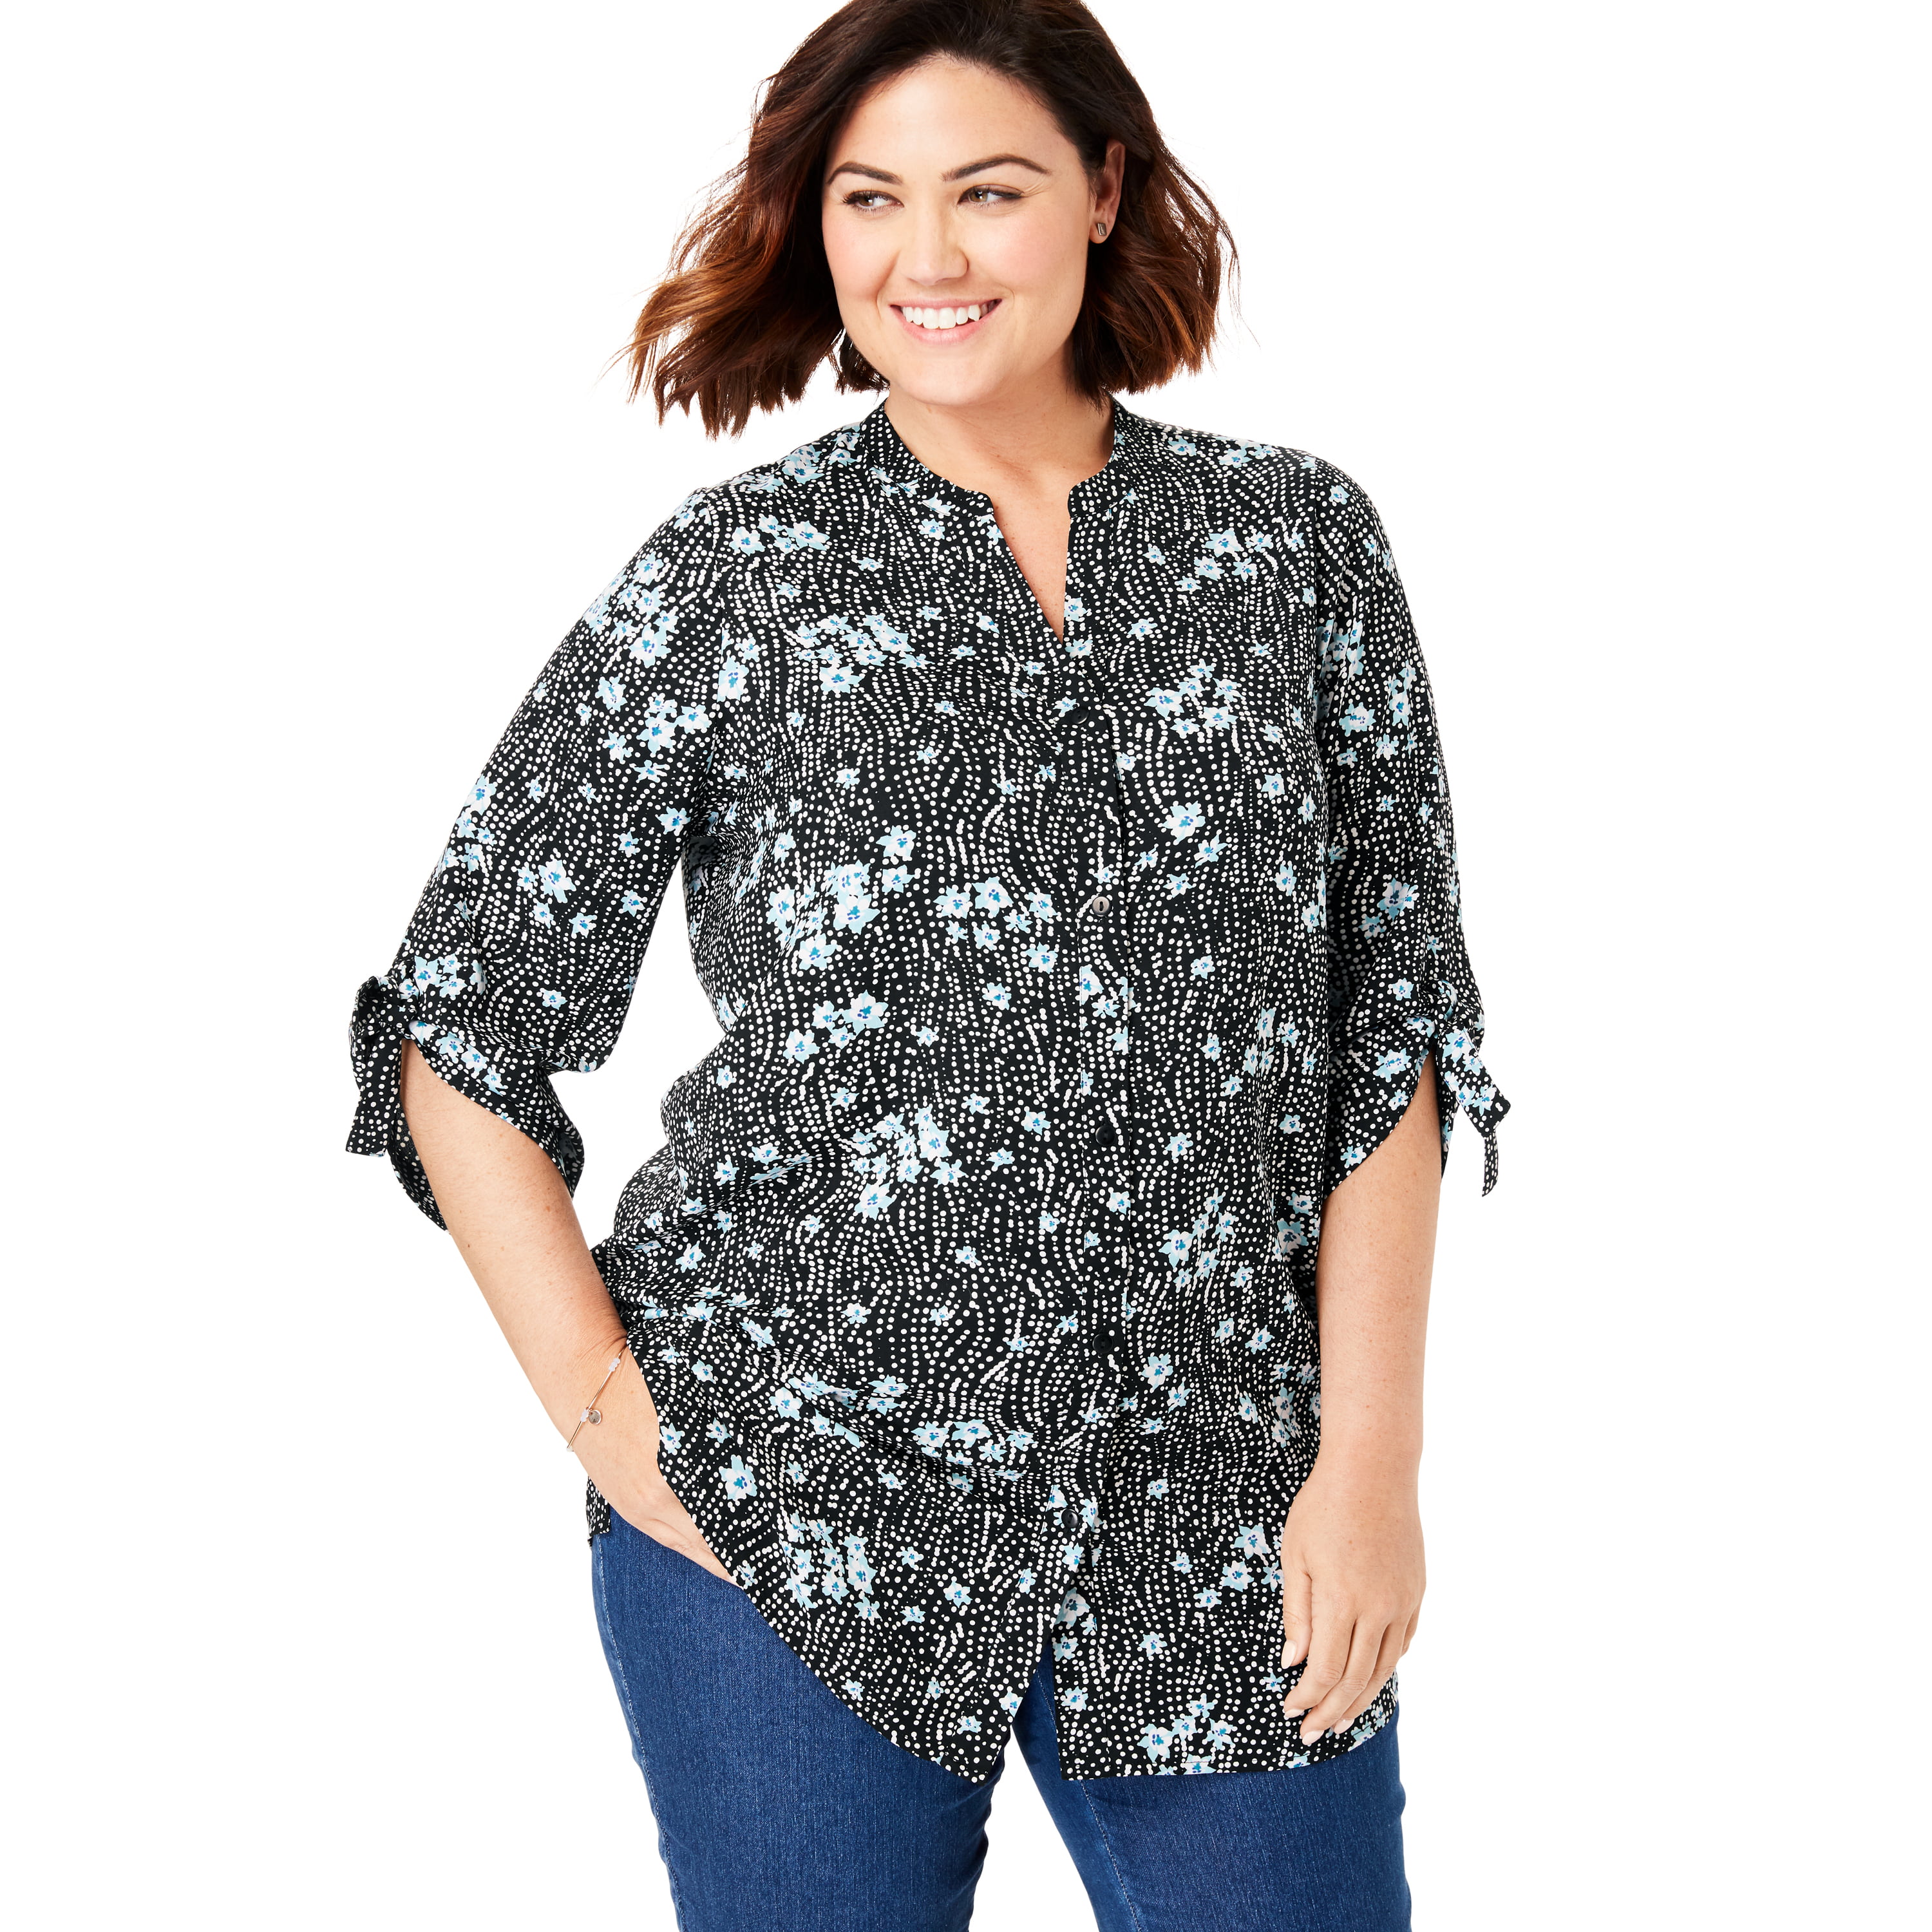 Woman Within - Woman Within Women's Plus Size Tie-Sleeve Button Down ...